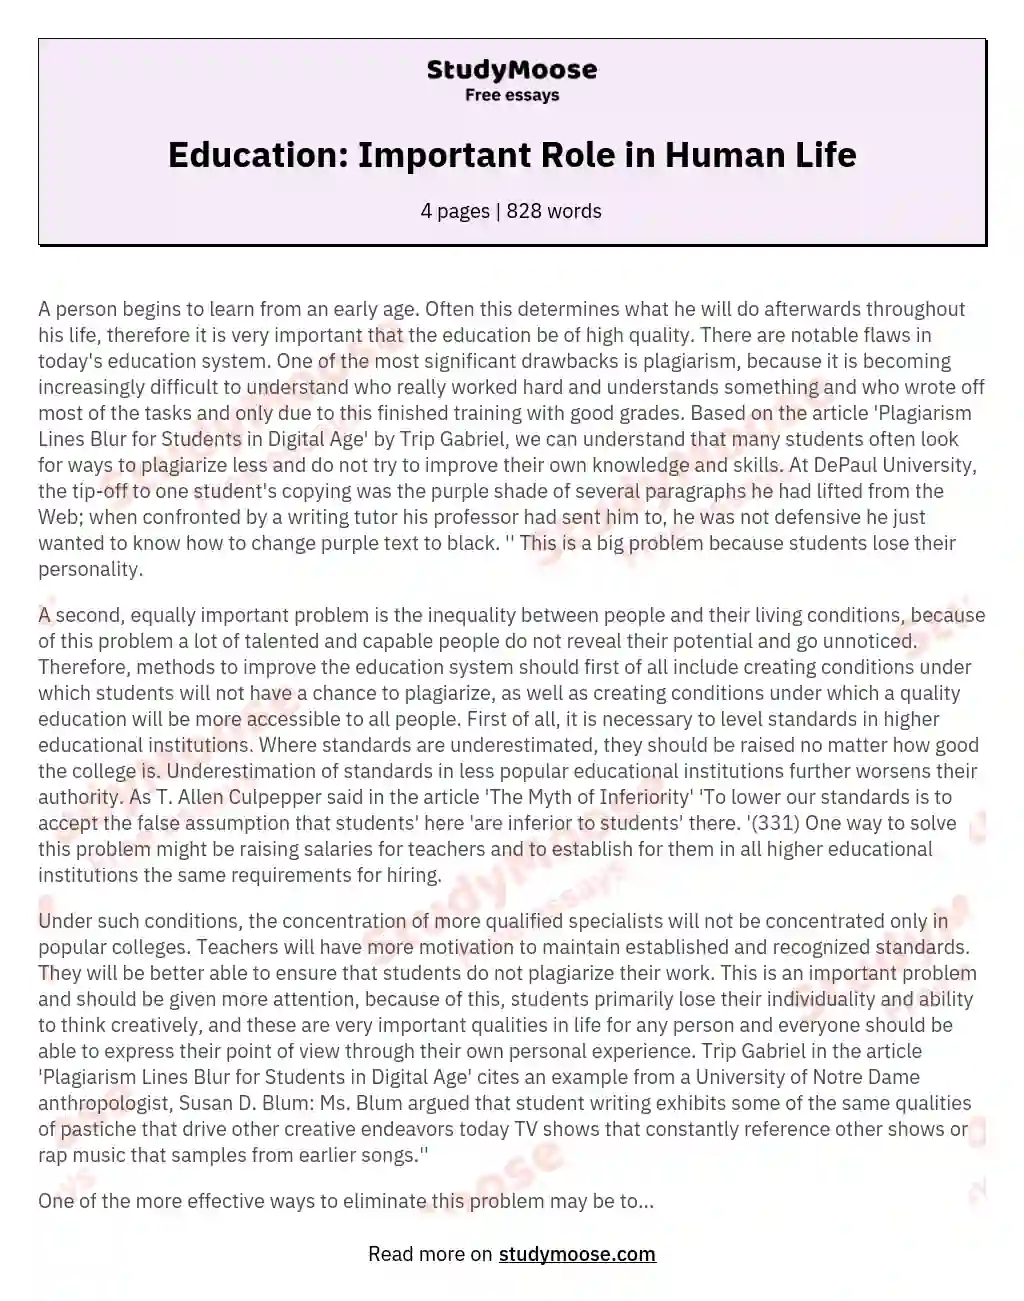 Education: Important Role in Human Life